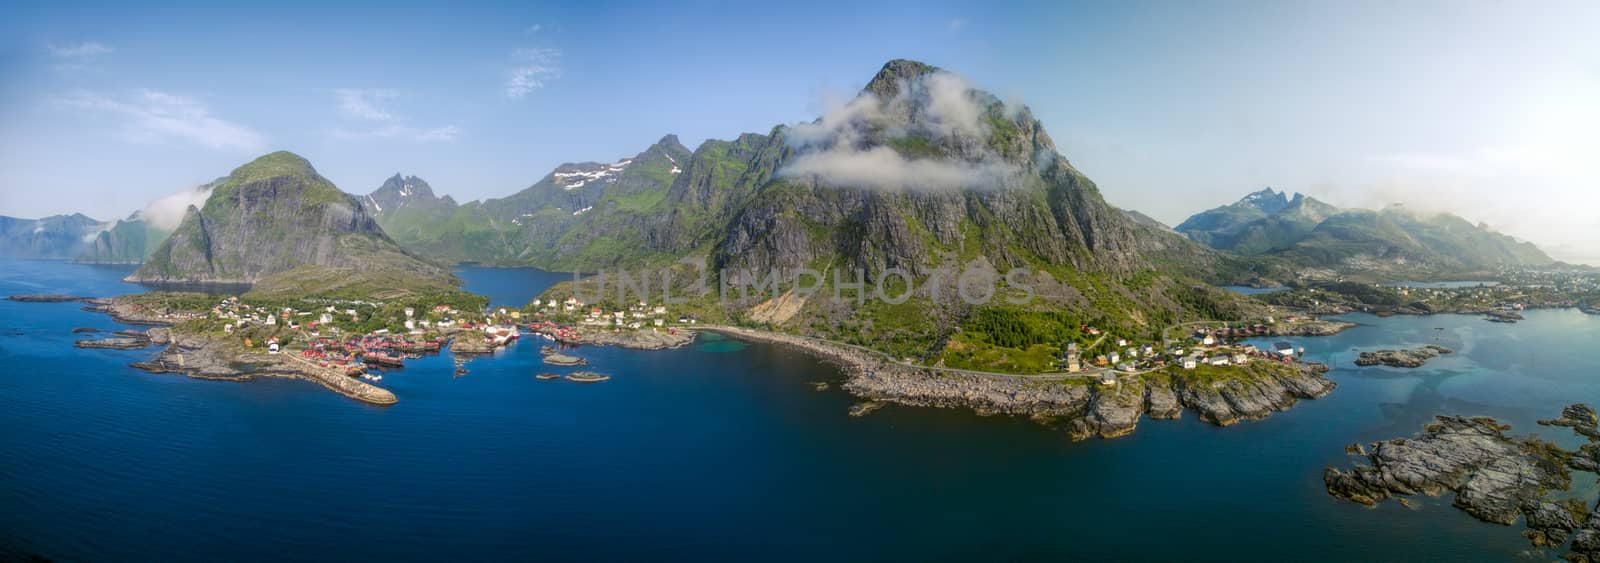 Scenic panorama of traditional fishing village A on Lofoten islands in Norway